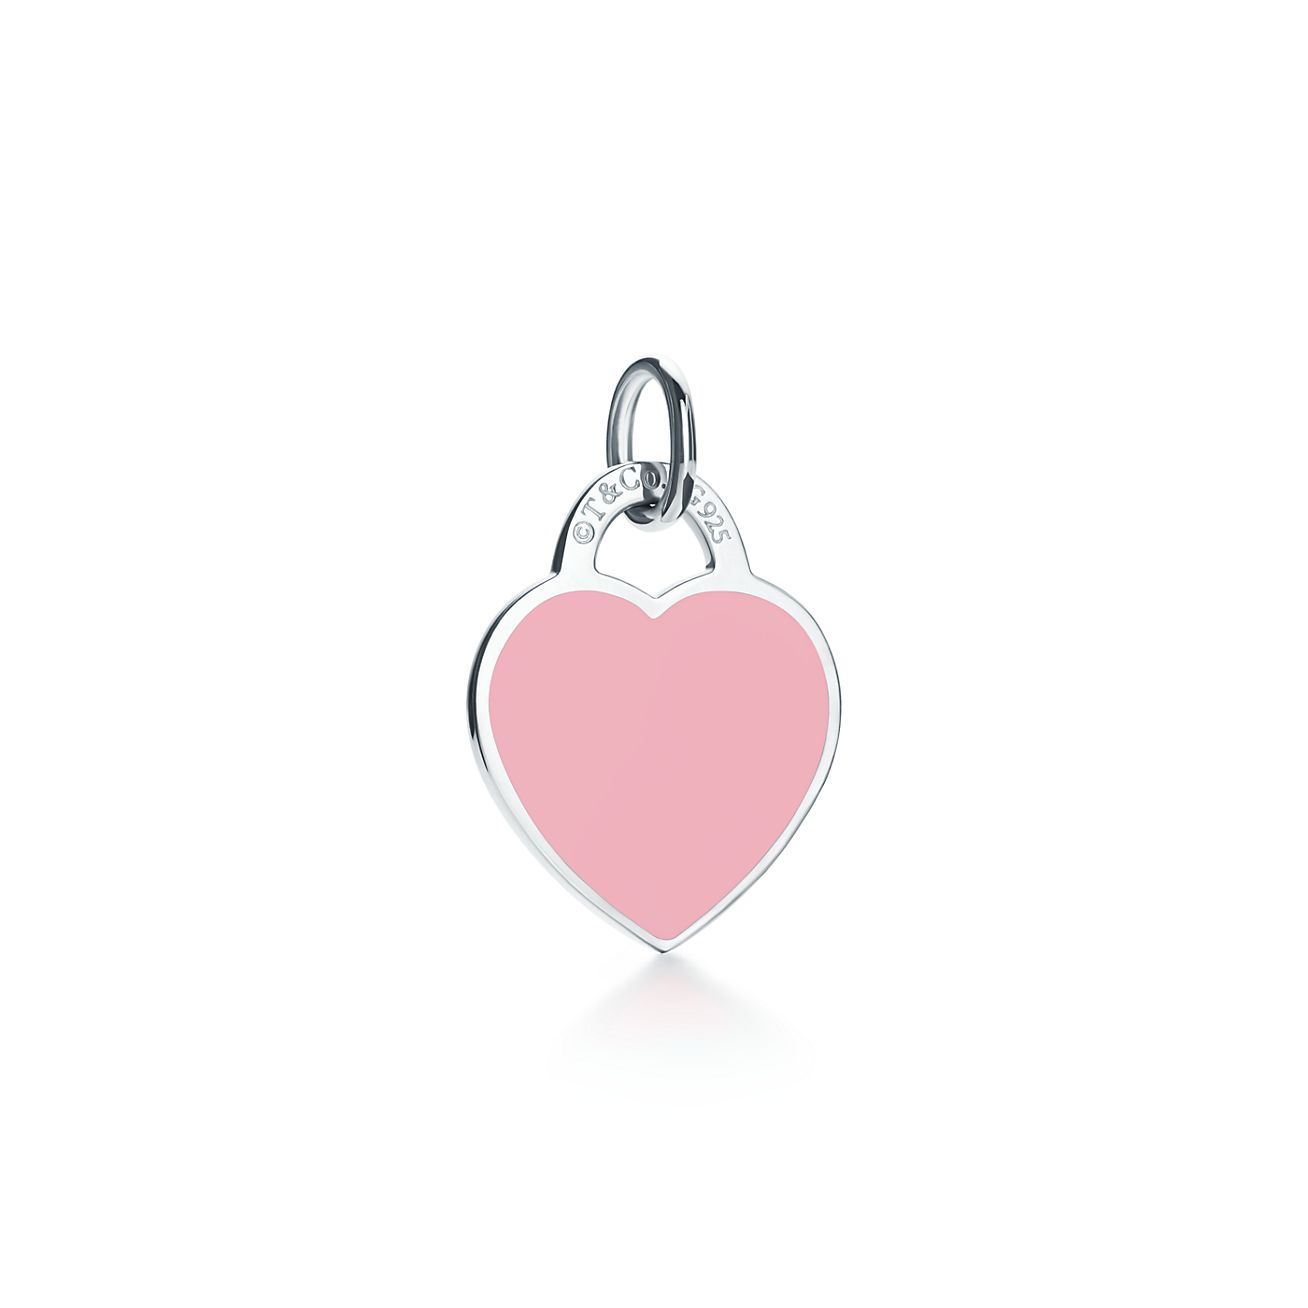 Return to Tiffany™ Heart Tag Bead Bracelet in Silver and Pink | Tiffany & Co .